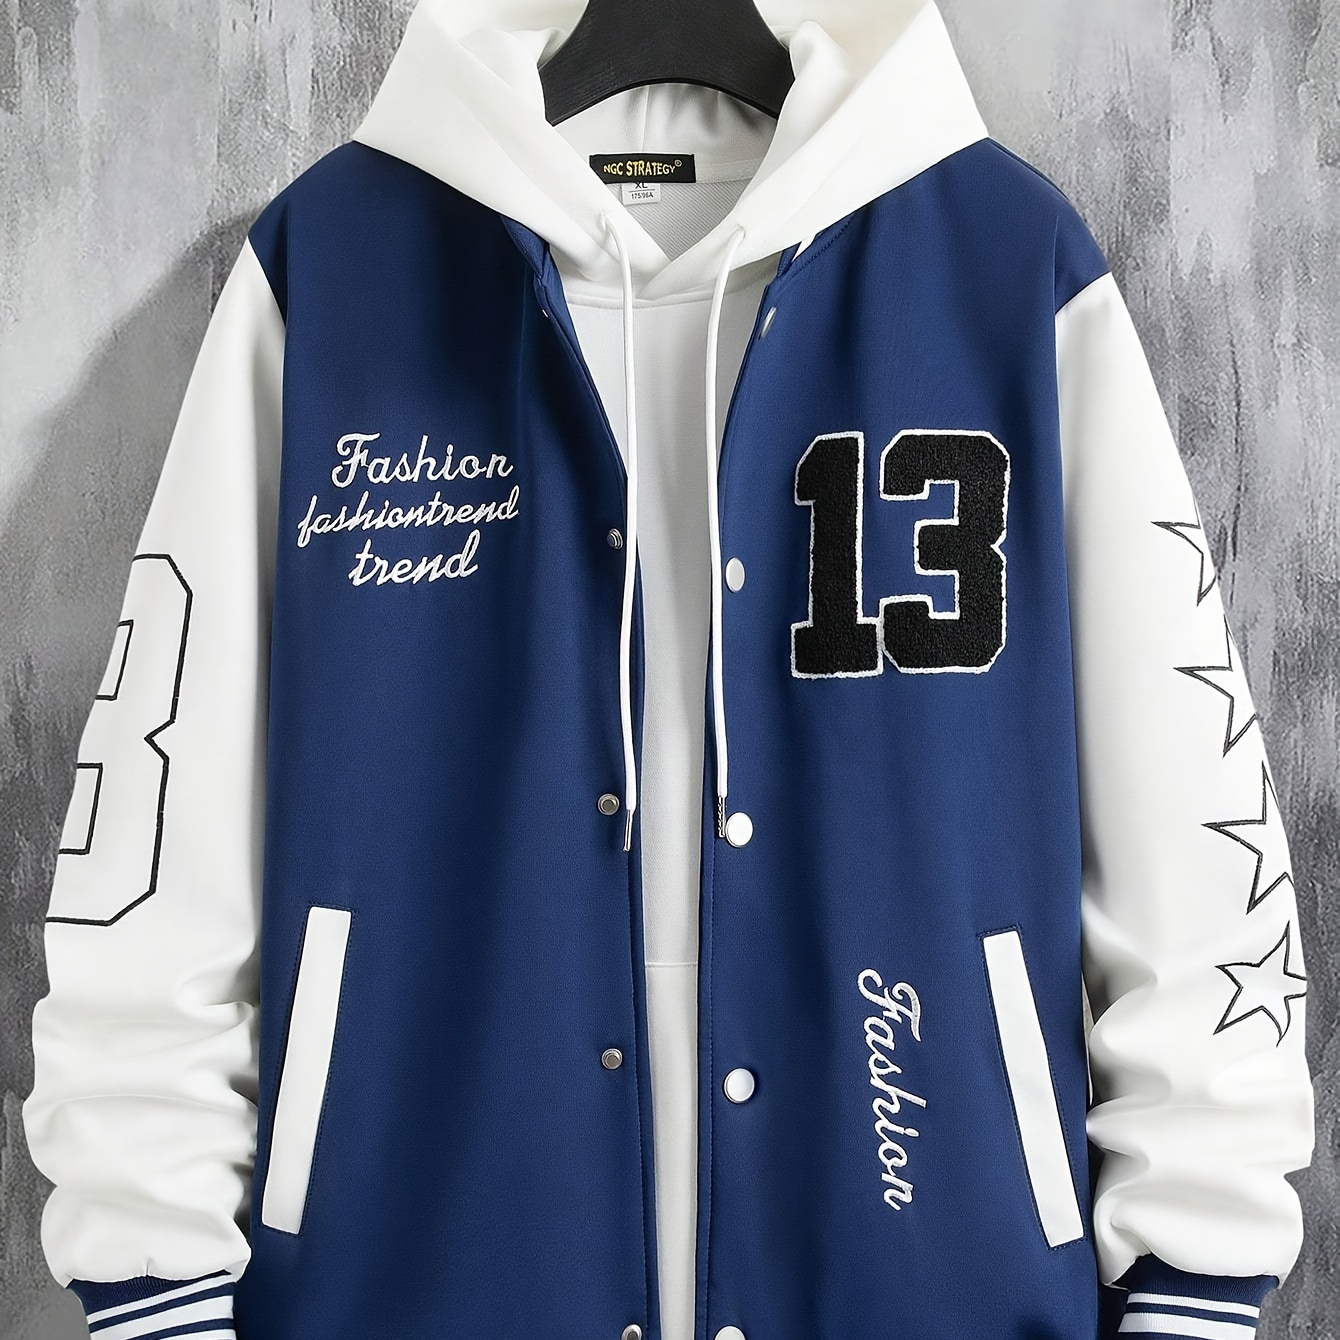 

Men's Varsity Jacket, Casual Sweatshirt Cardigan, Baseball Jacket With Striped Trim And Stylish Embroidery, Comfortable Fit Outerwear